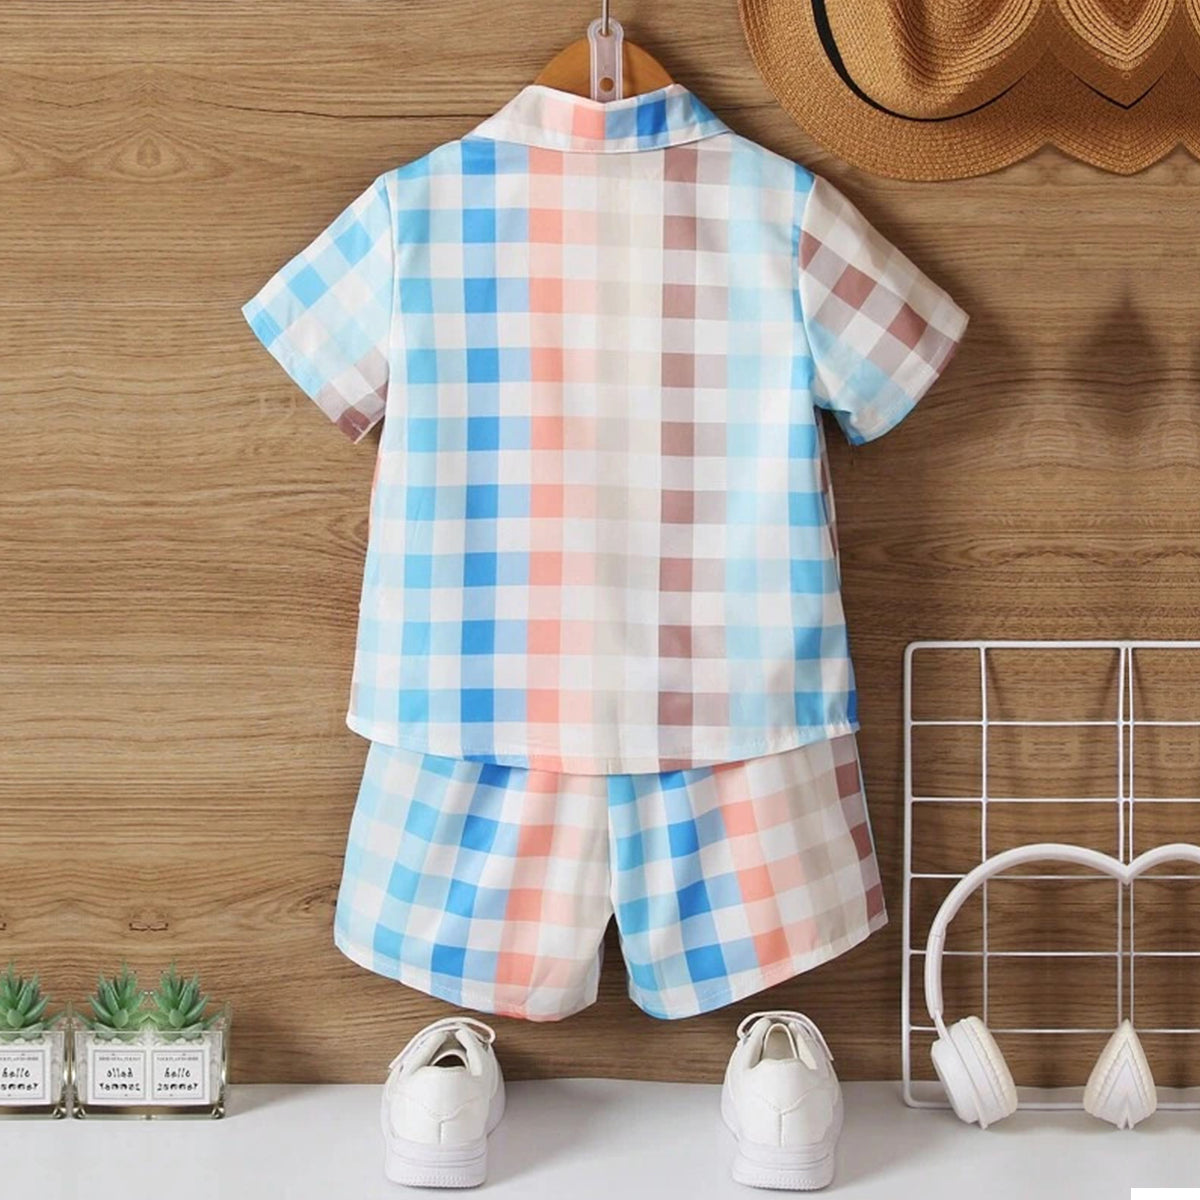 Venutaloza Baby Set Letters & Expression and Plaid Turn Down Collar (Combo Pack Of 3) Casual Printed Shirt & Shorts Without tee Two Piece Set For Boy & Girls.